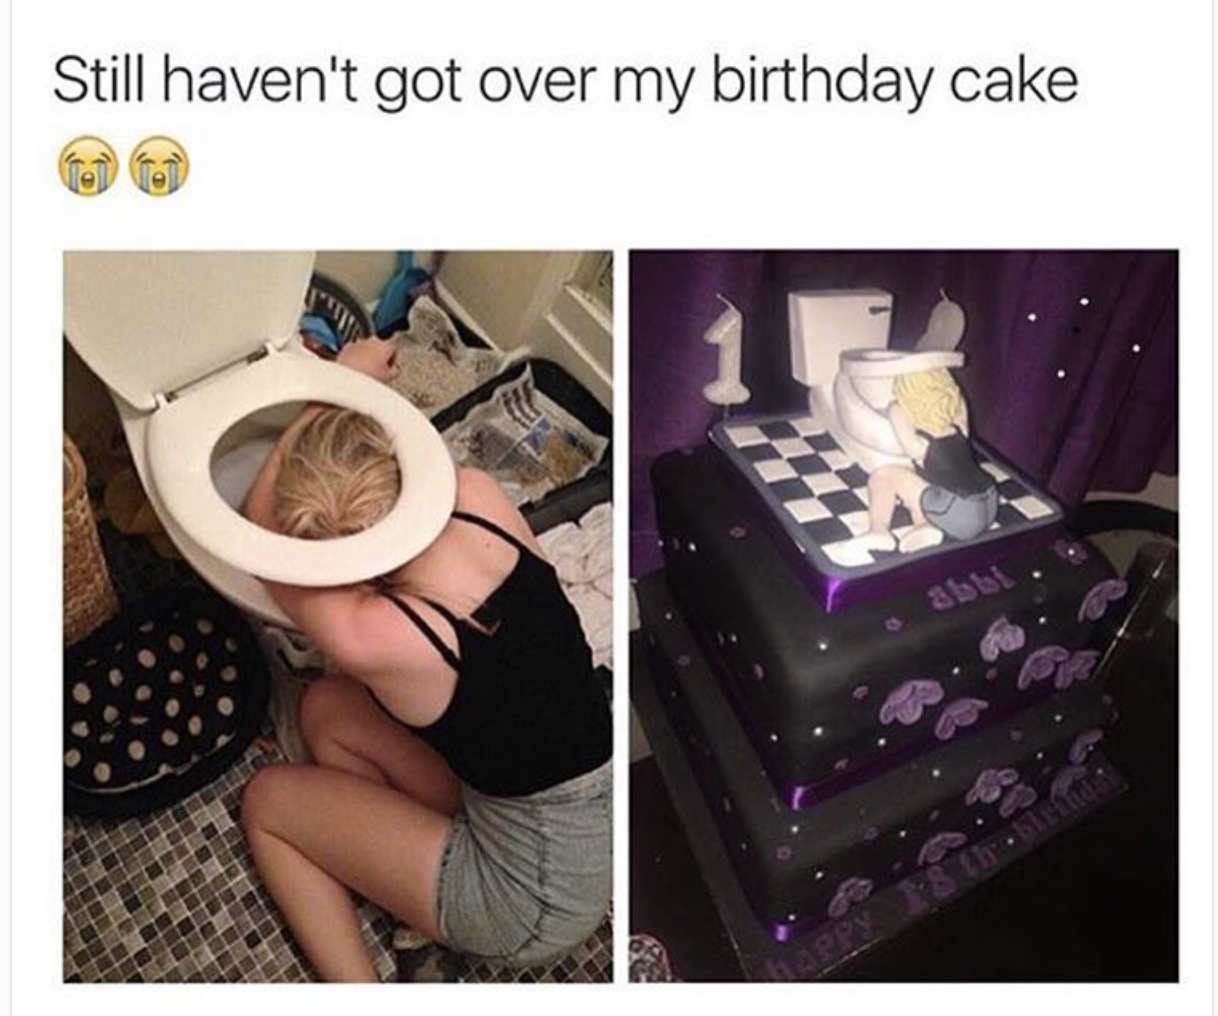 Funny pic of girl puking in the toilet and someone recreated the scene on a cake.